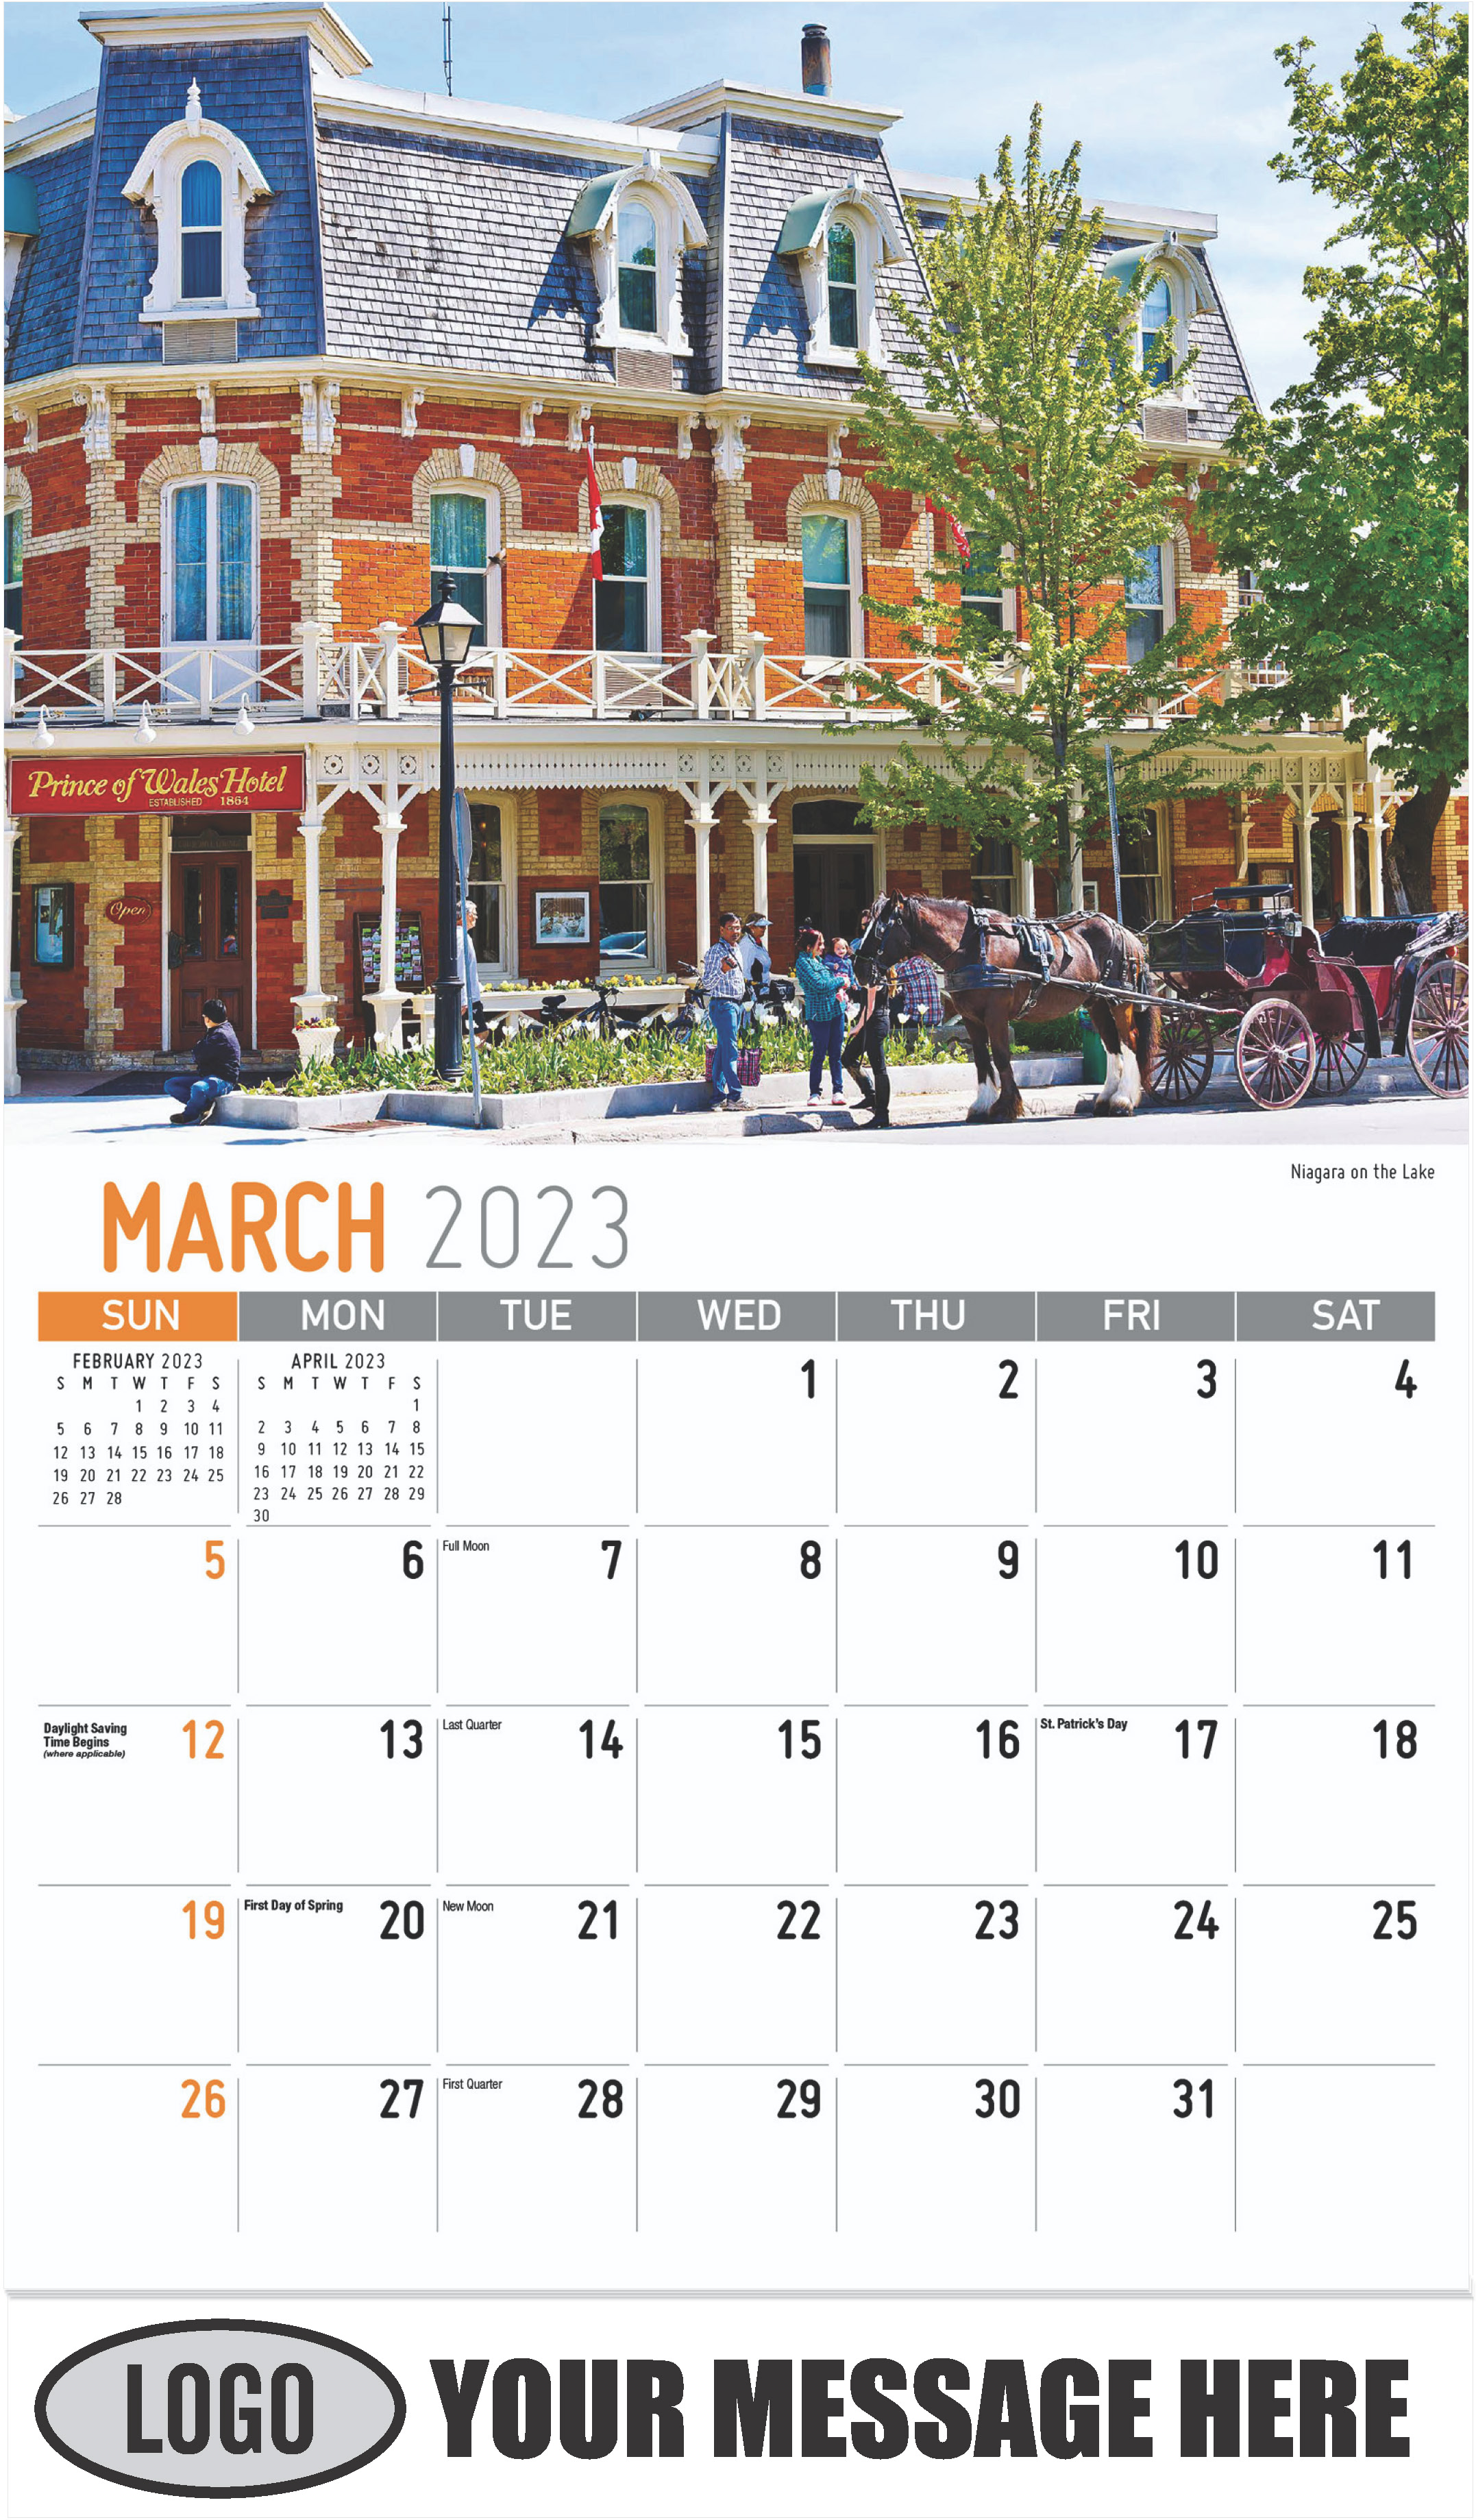 Niagara on the Lake - March - Scenes of Ontario 2023 Promotional Calendar